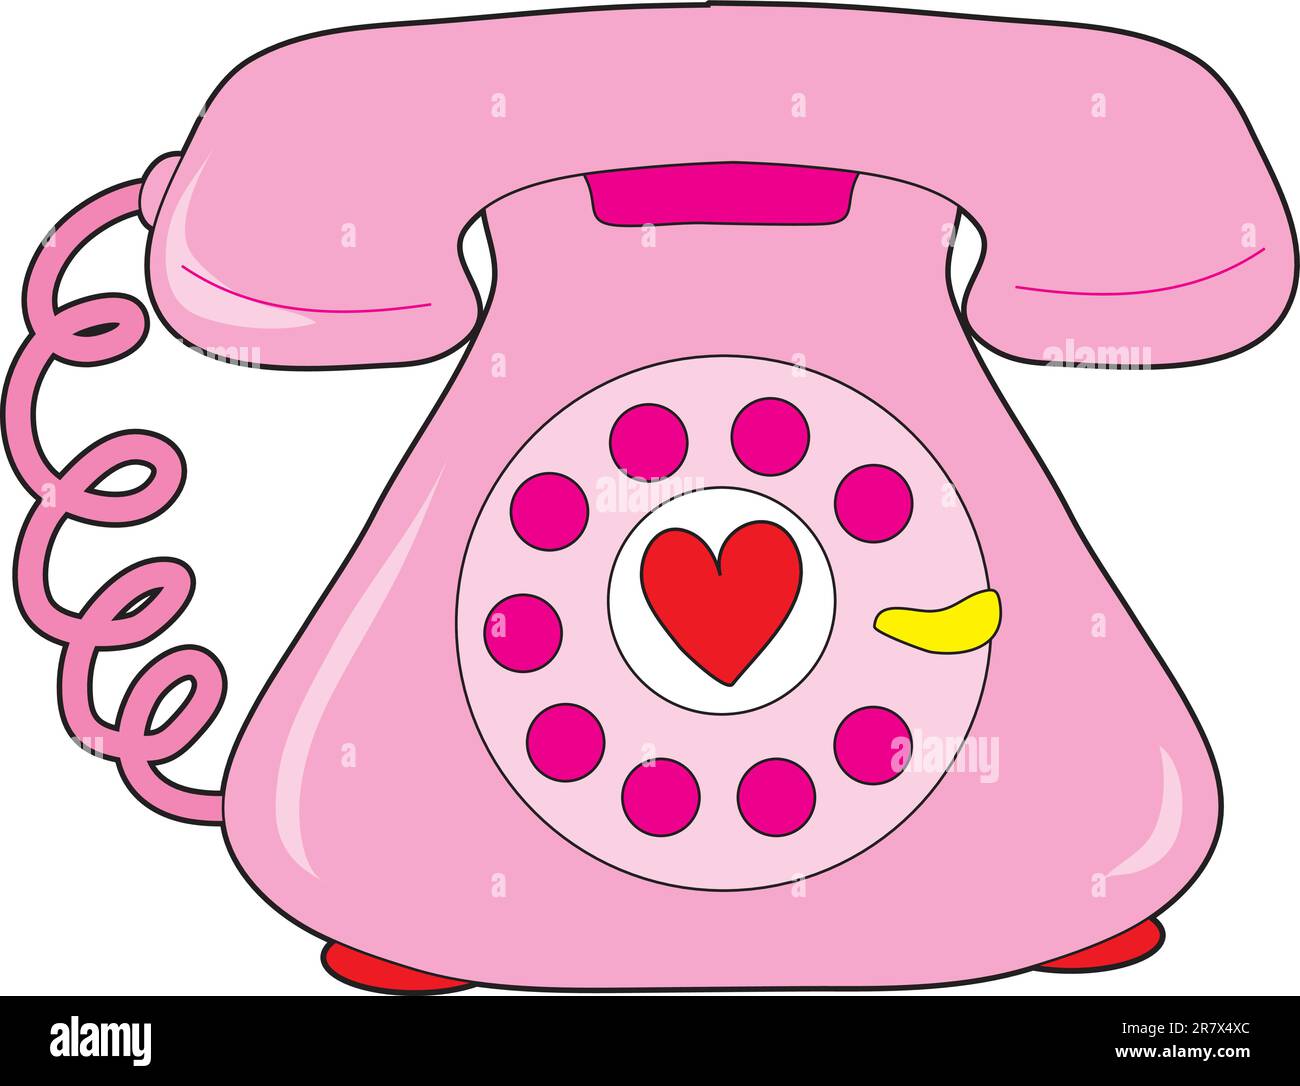 A pink telephone with a heart in the centre of the rotary dial. Stock Vector